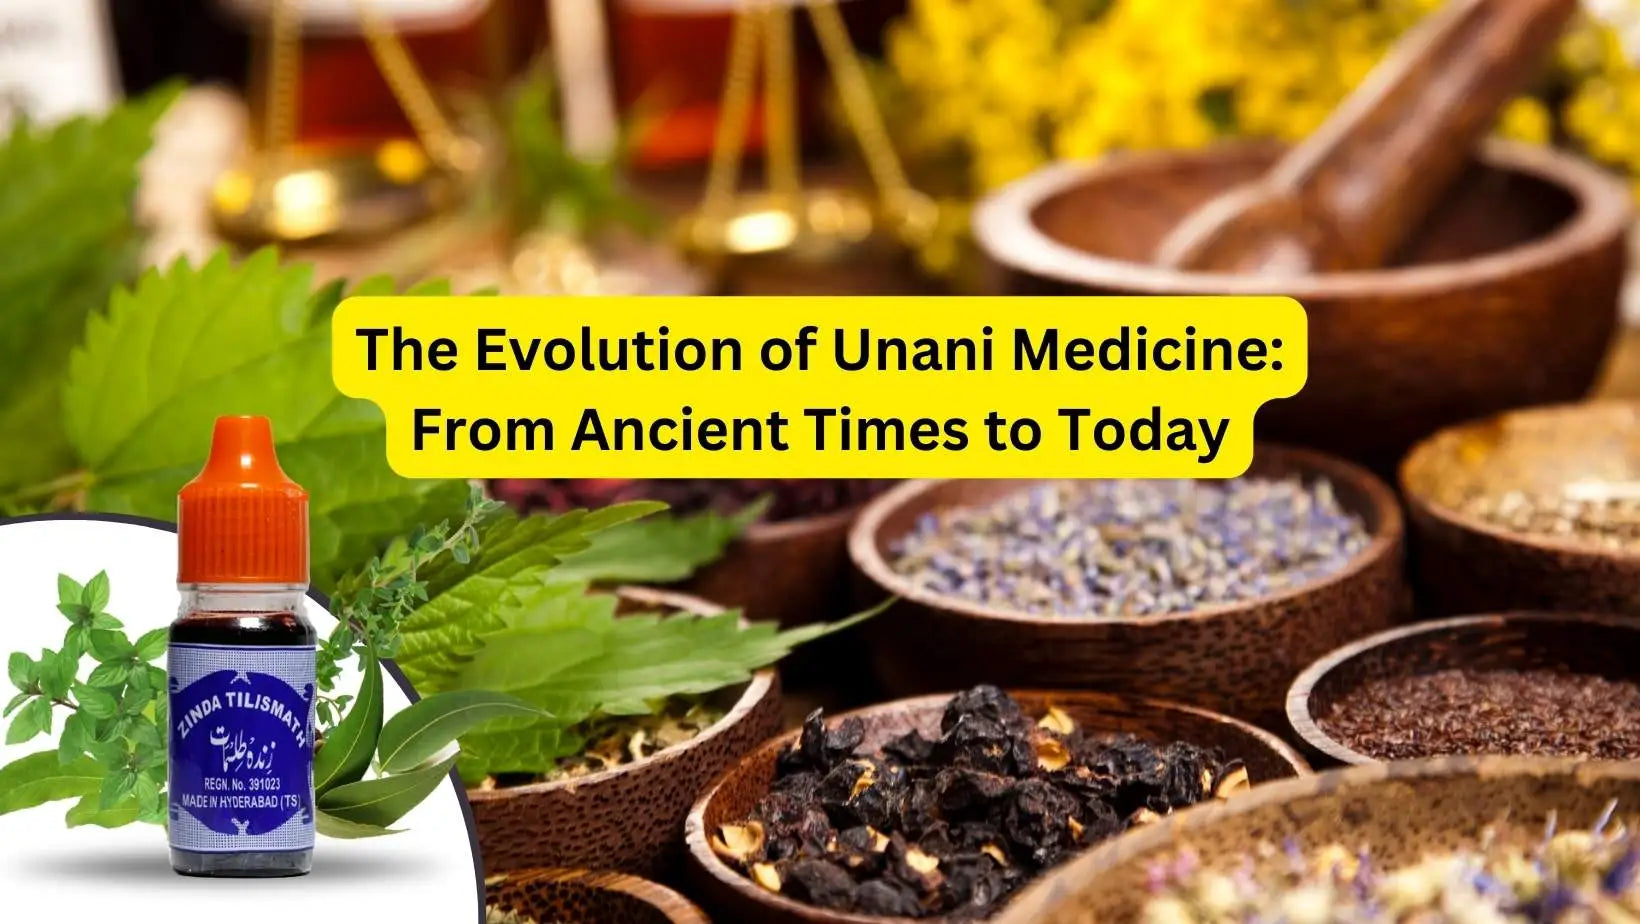 The Evolution of Unani Medicine: From Ancient Times to Today